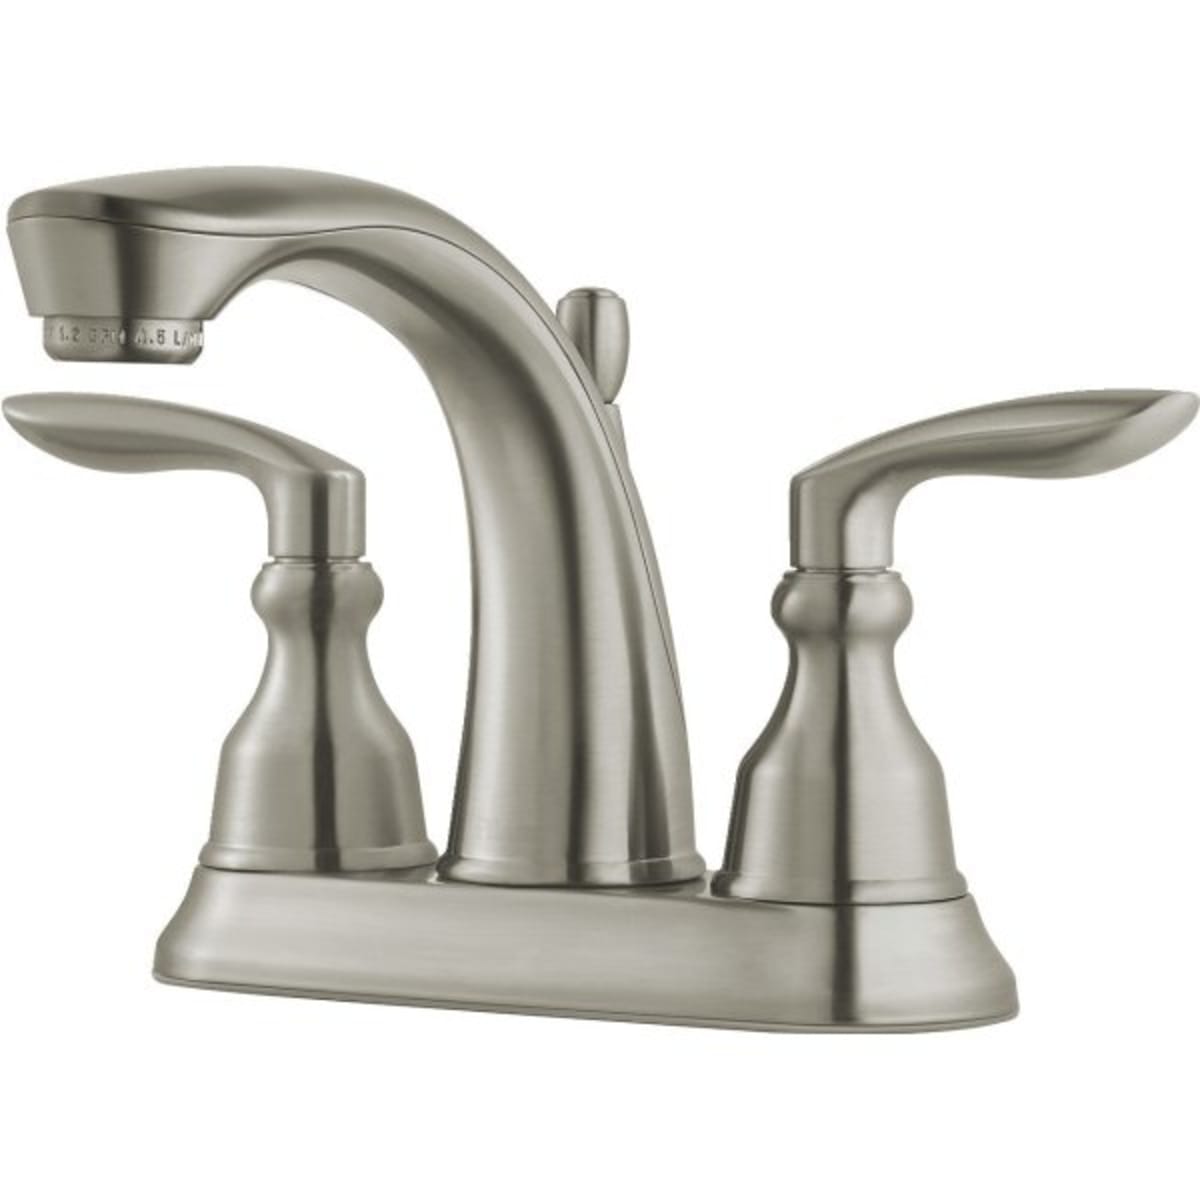 Pfister 4 Inch Faucet Hd Supply